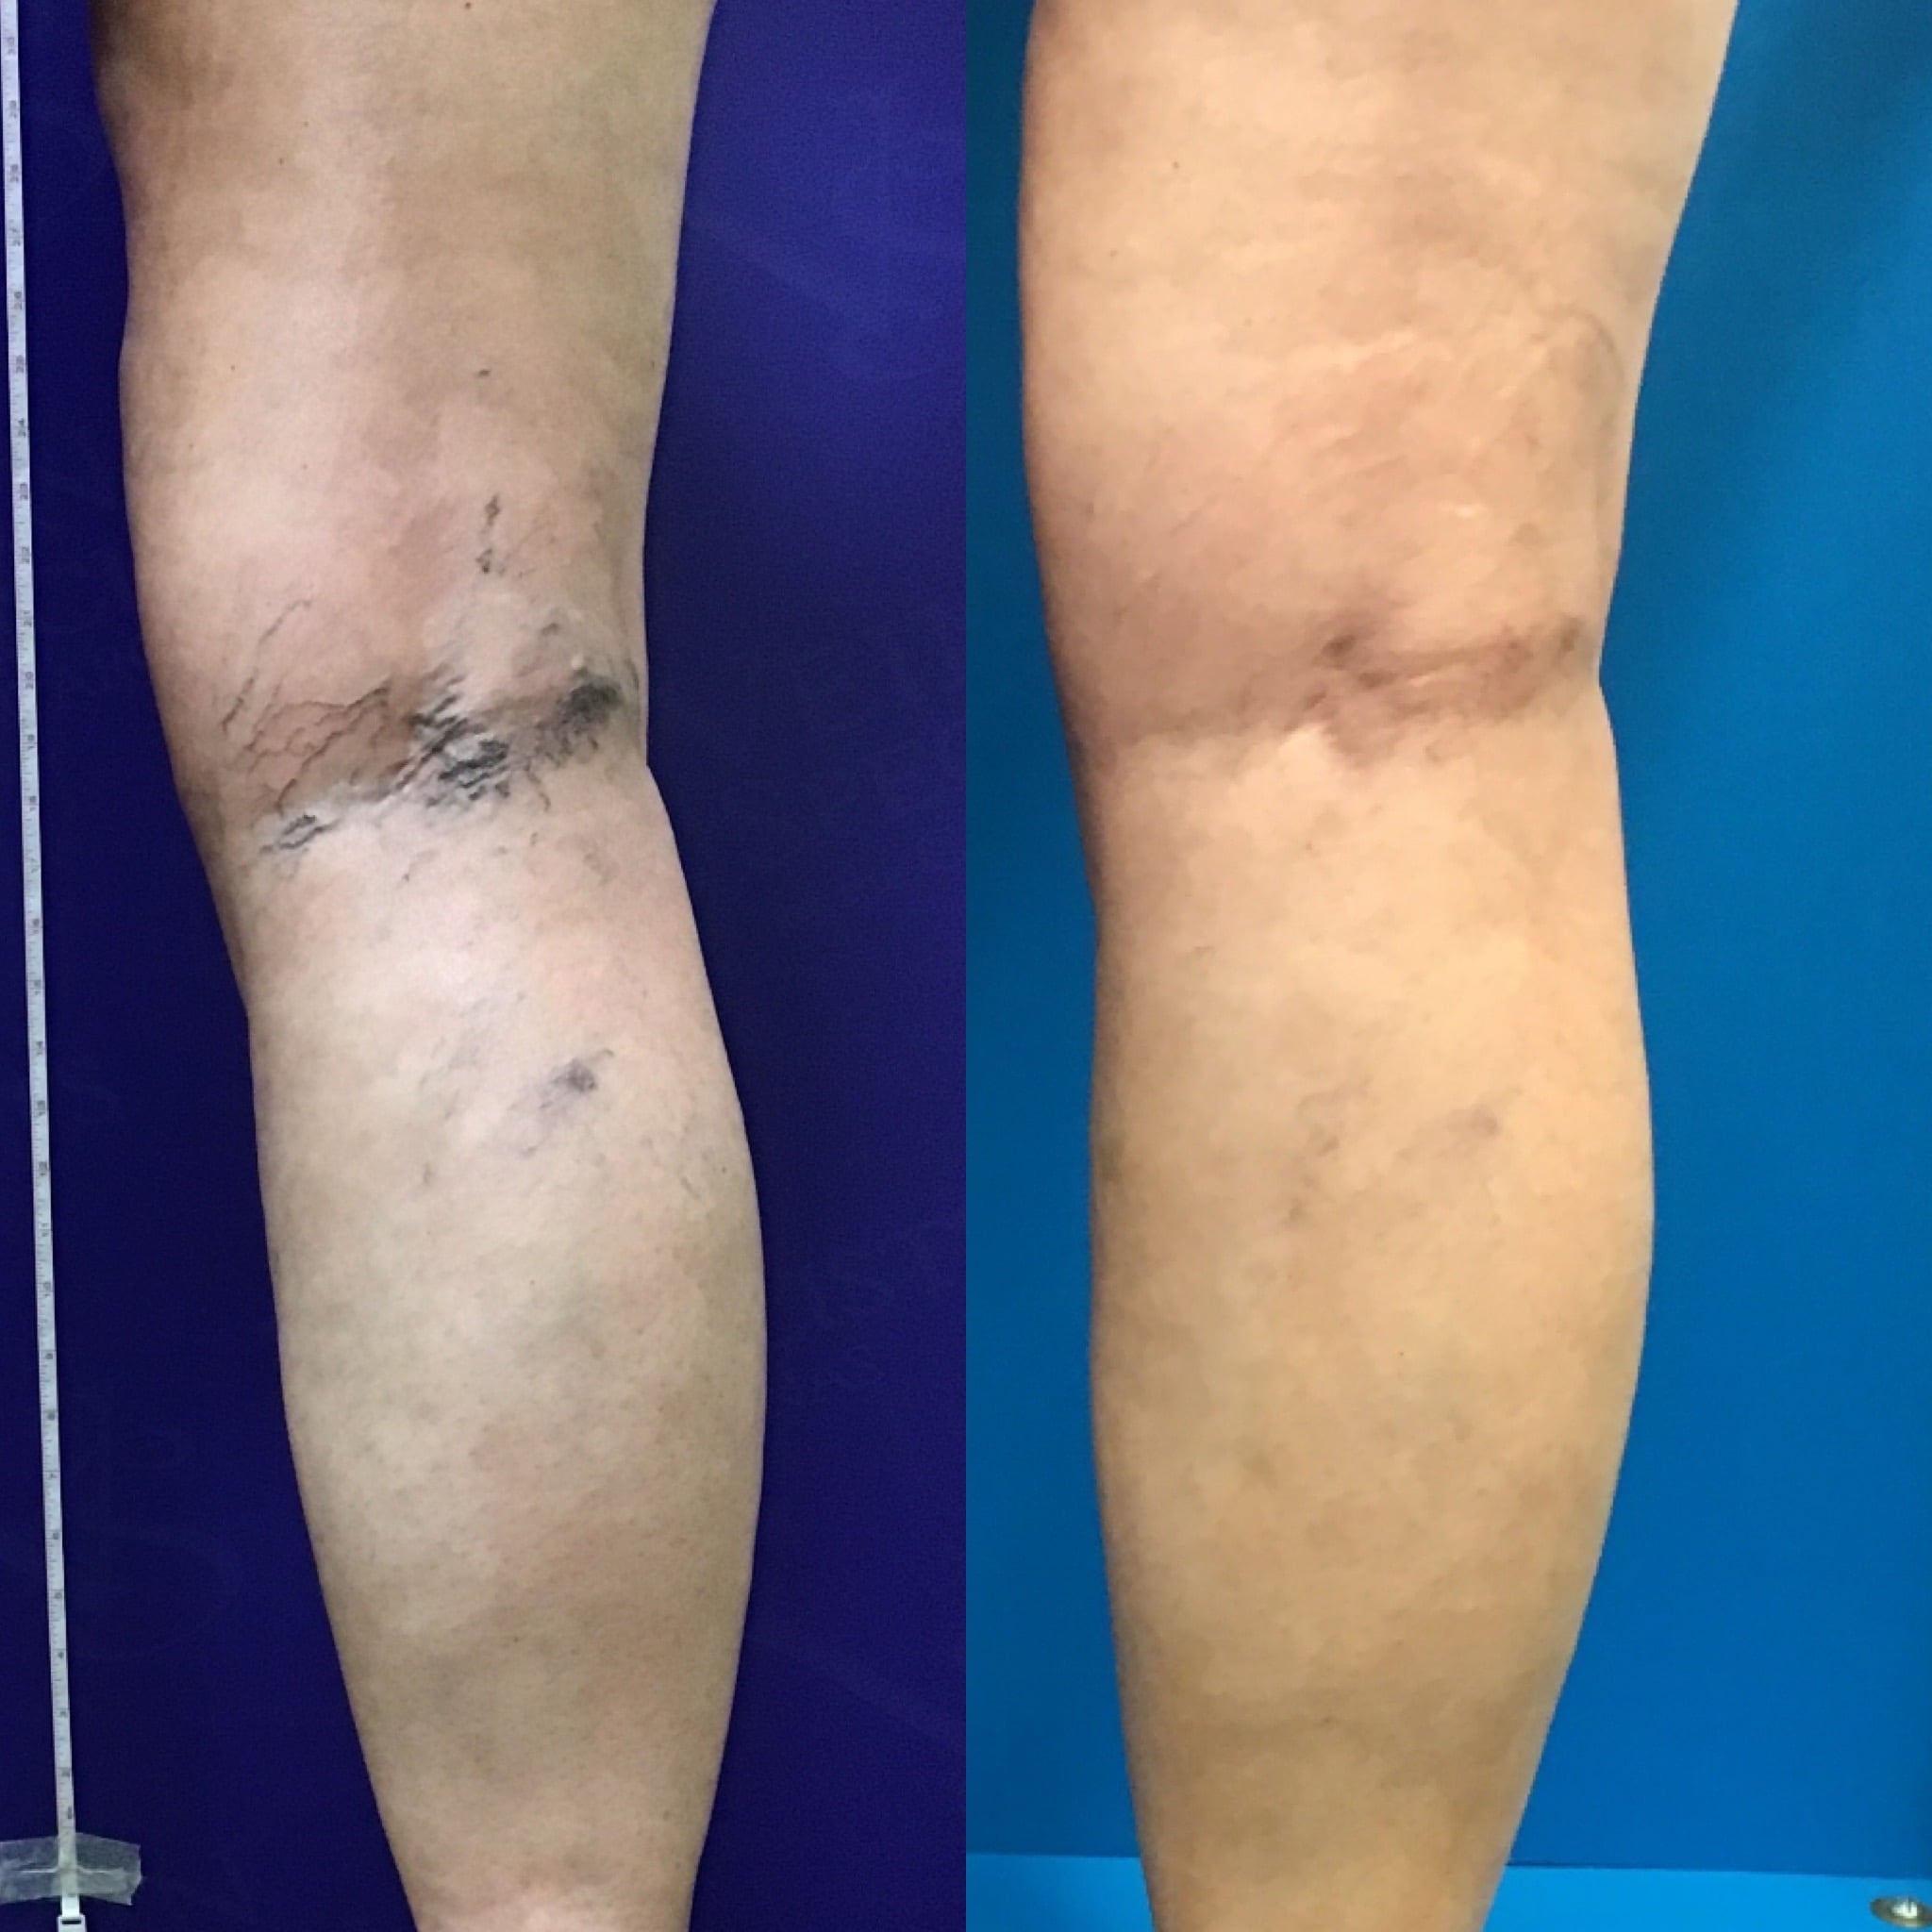 Fall Vein Treatment - It's the Perfect Time! Vein Specialists of the  Carolinas